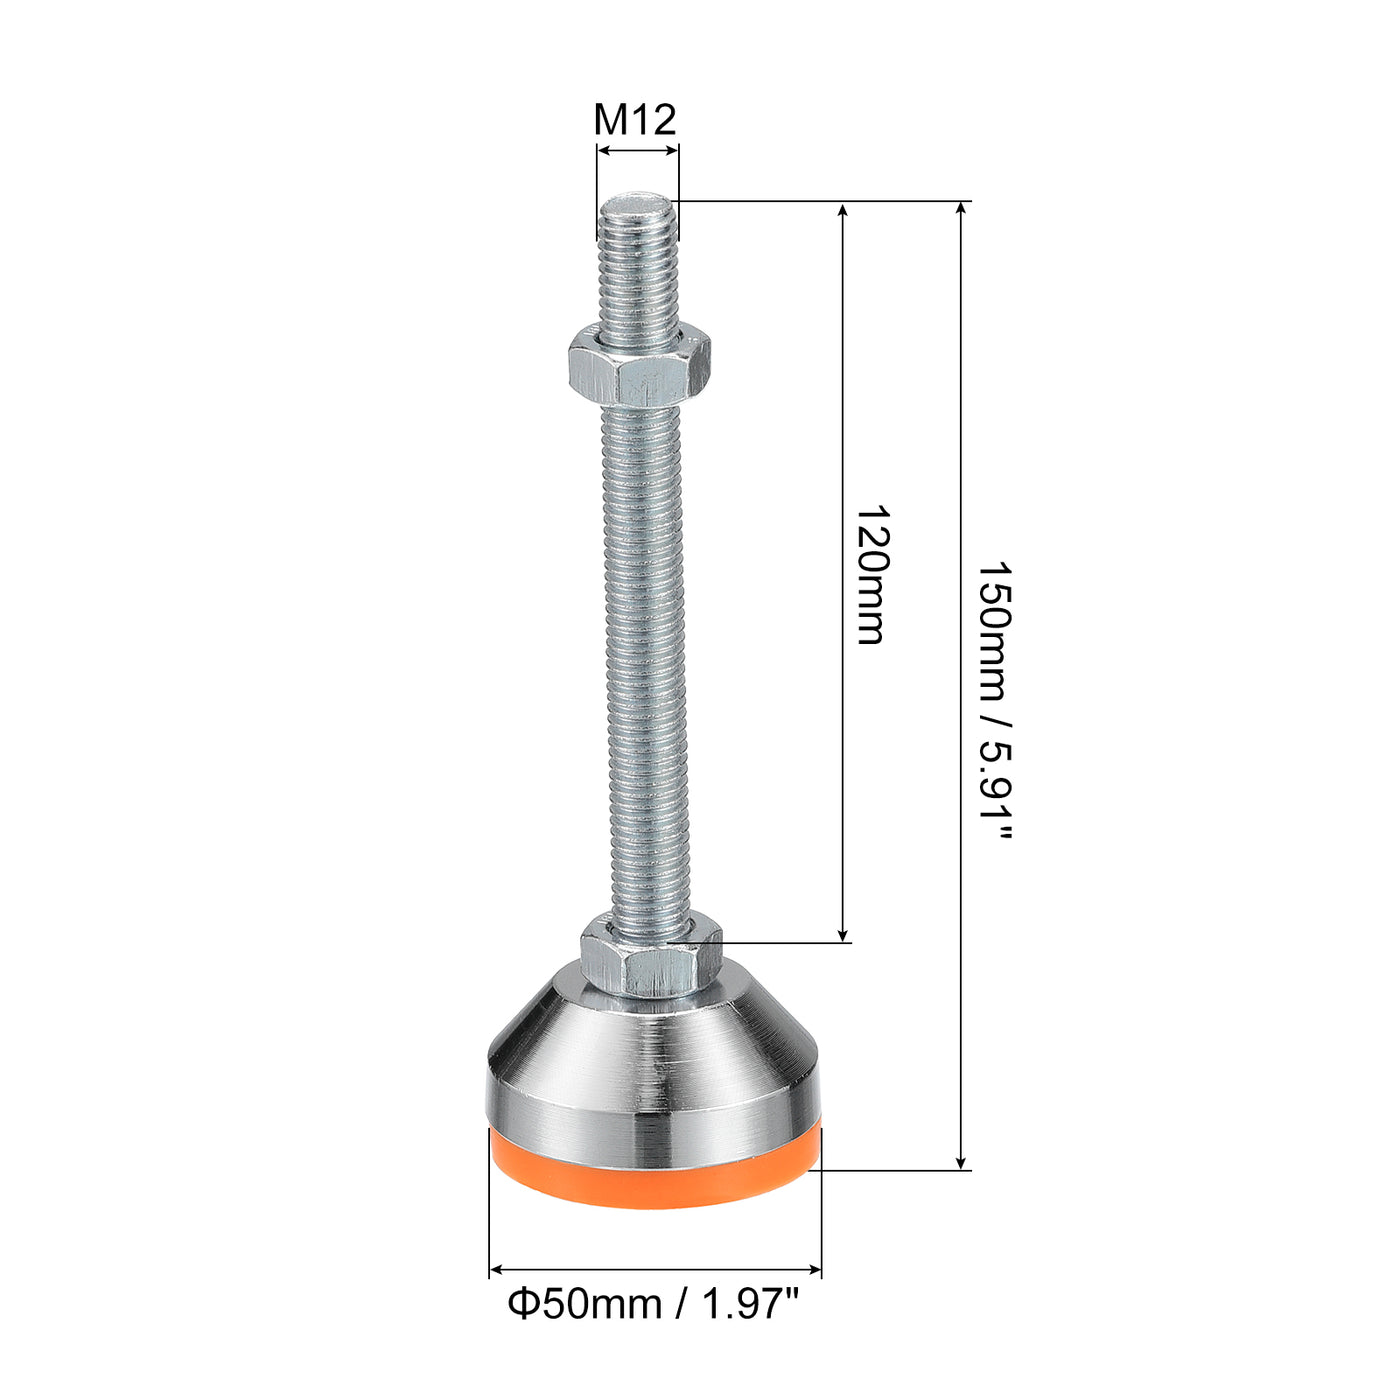 uxcell Uxcell Leveling Feet, 2Pcs M12x120x50mm - Carbon Steel Non-Skid Anti-shock Adjustable Table Feet, Leveling Screw Leg for Furniture Workshops Equipment